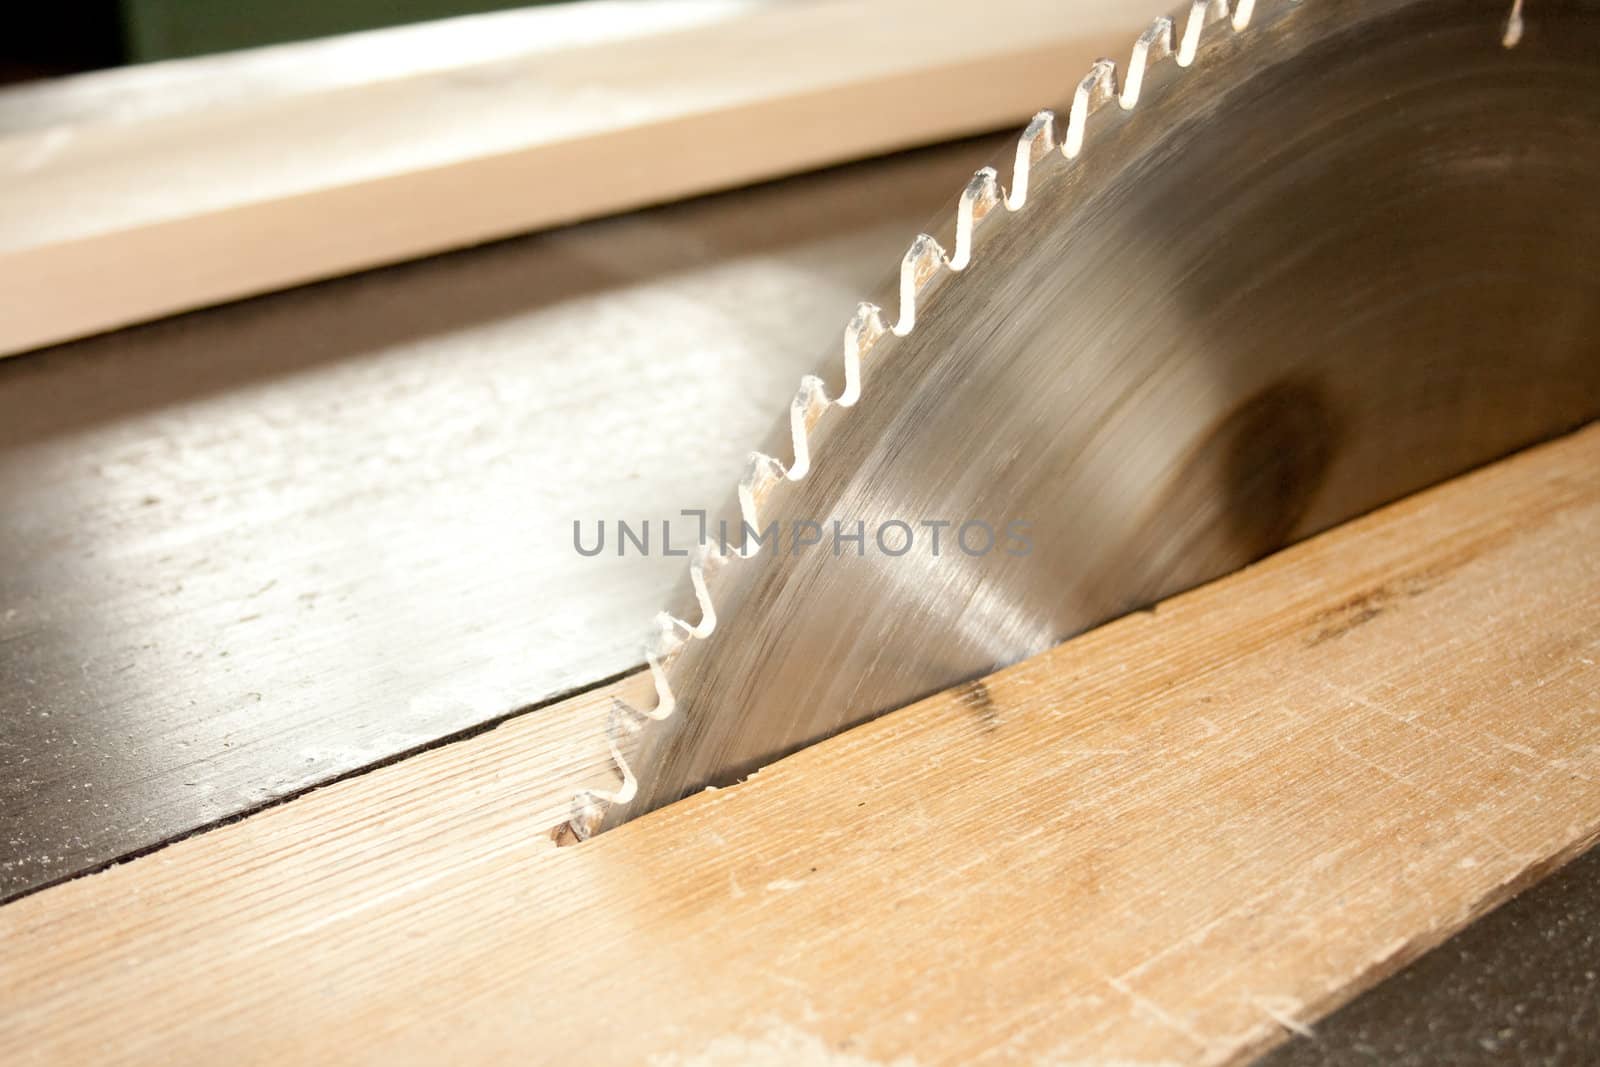 Blade cuts wood. The high speed of the saw blade.